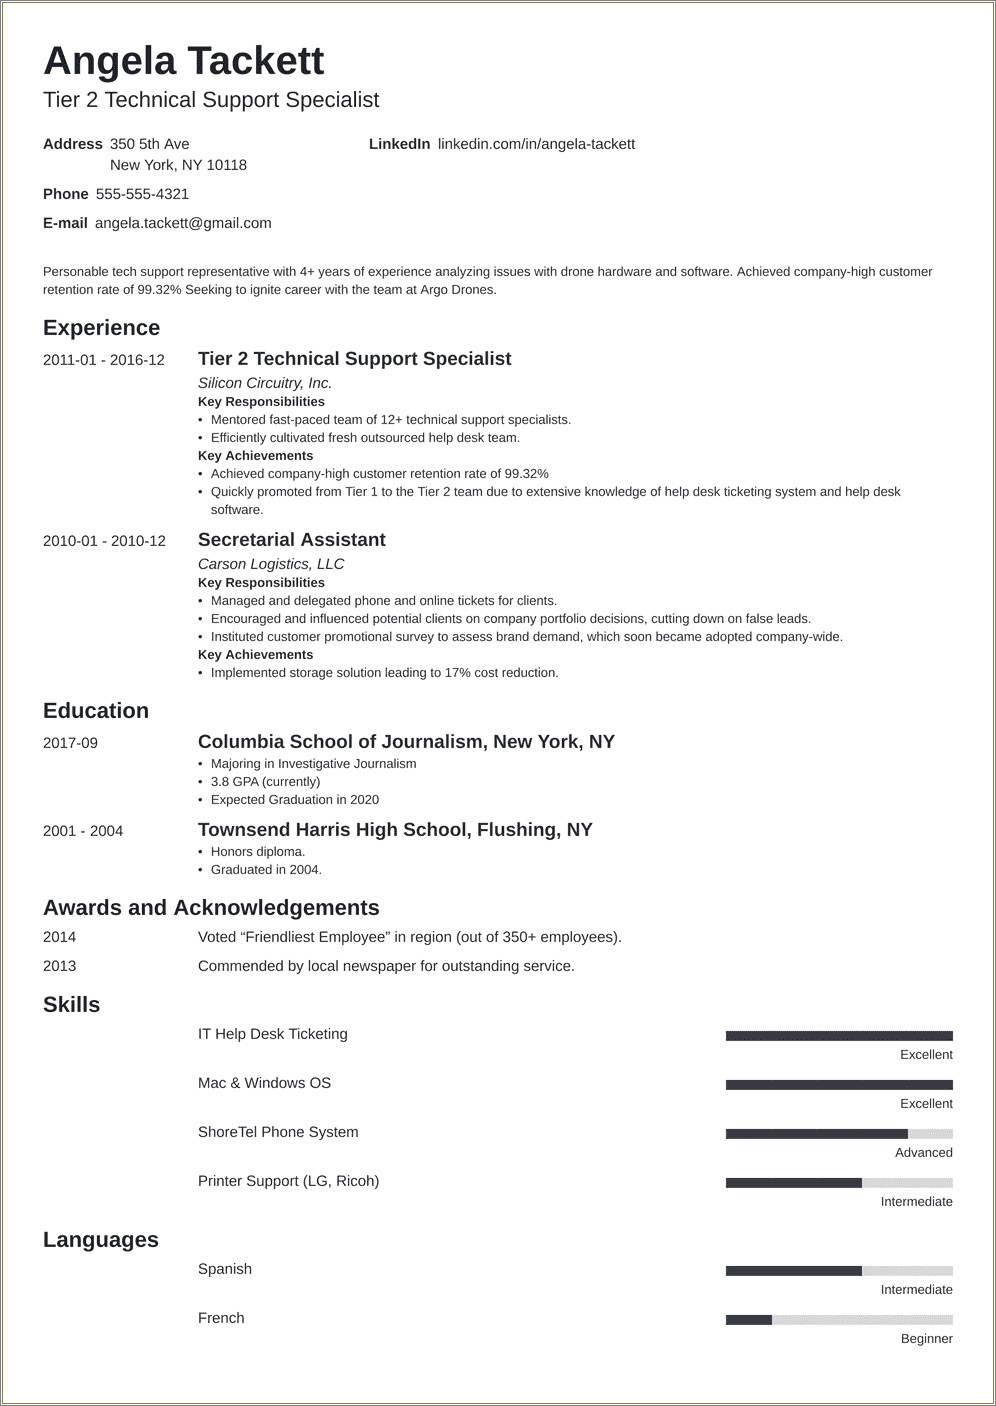 Resume Objective For Help Desk Analyst